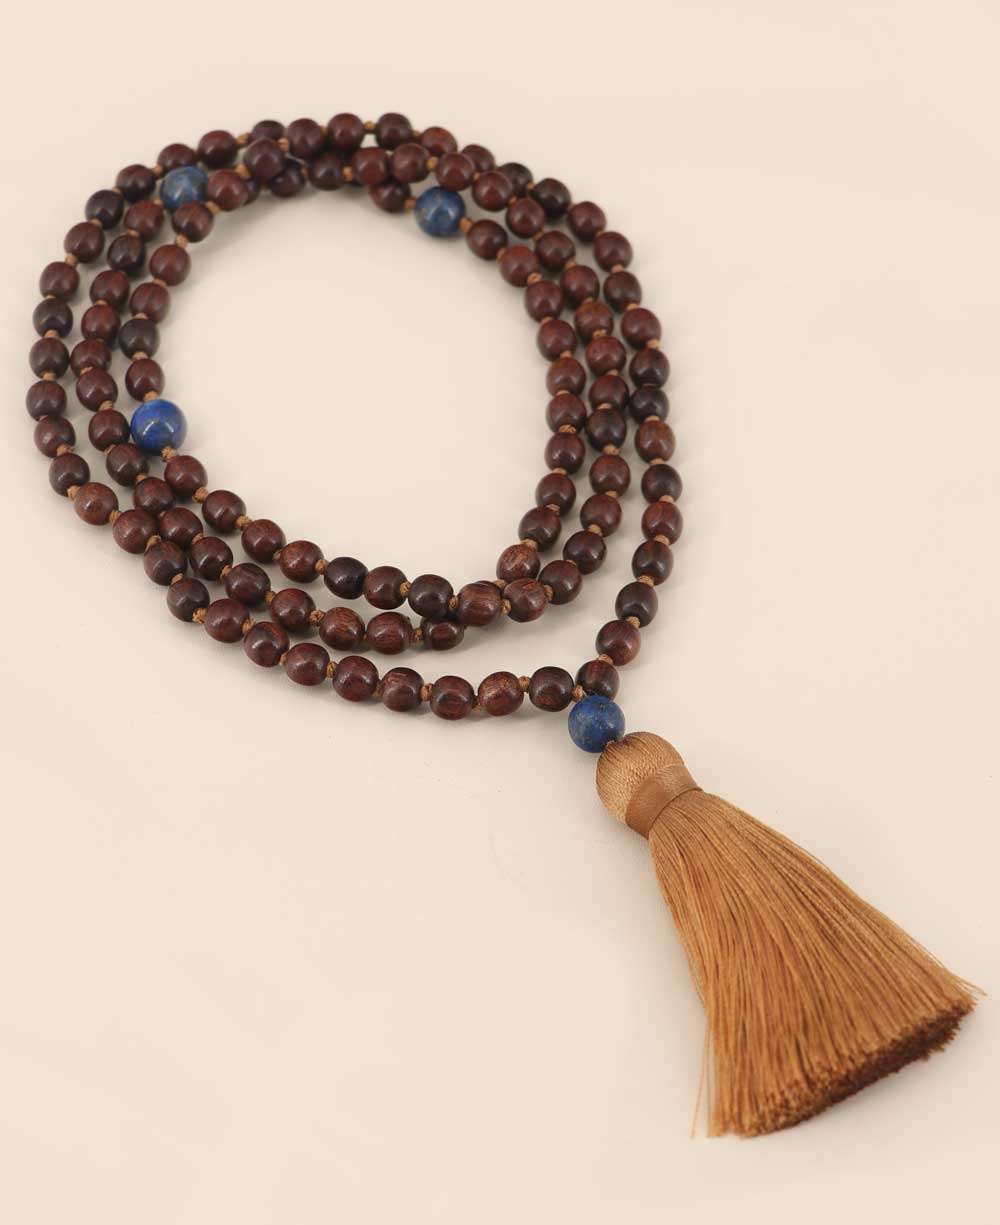 Mala Beads and Addiction Recovery